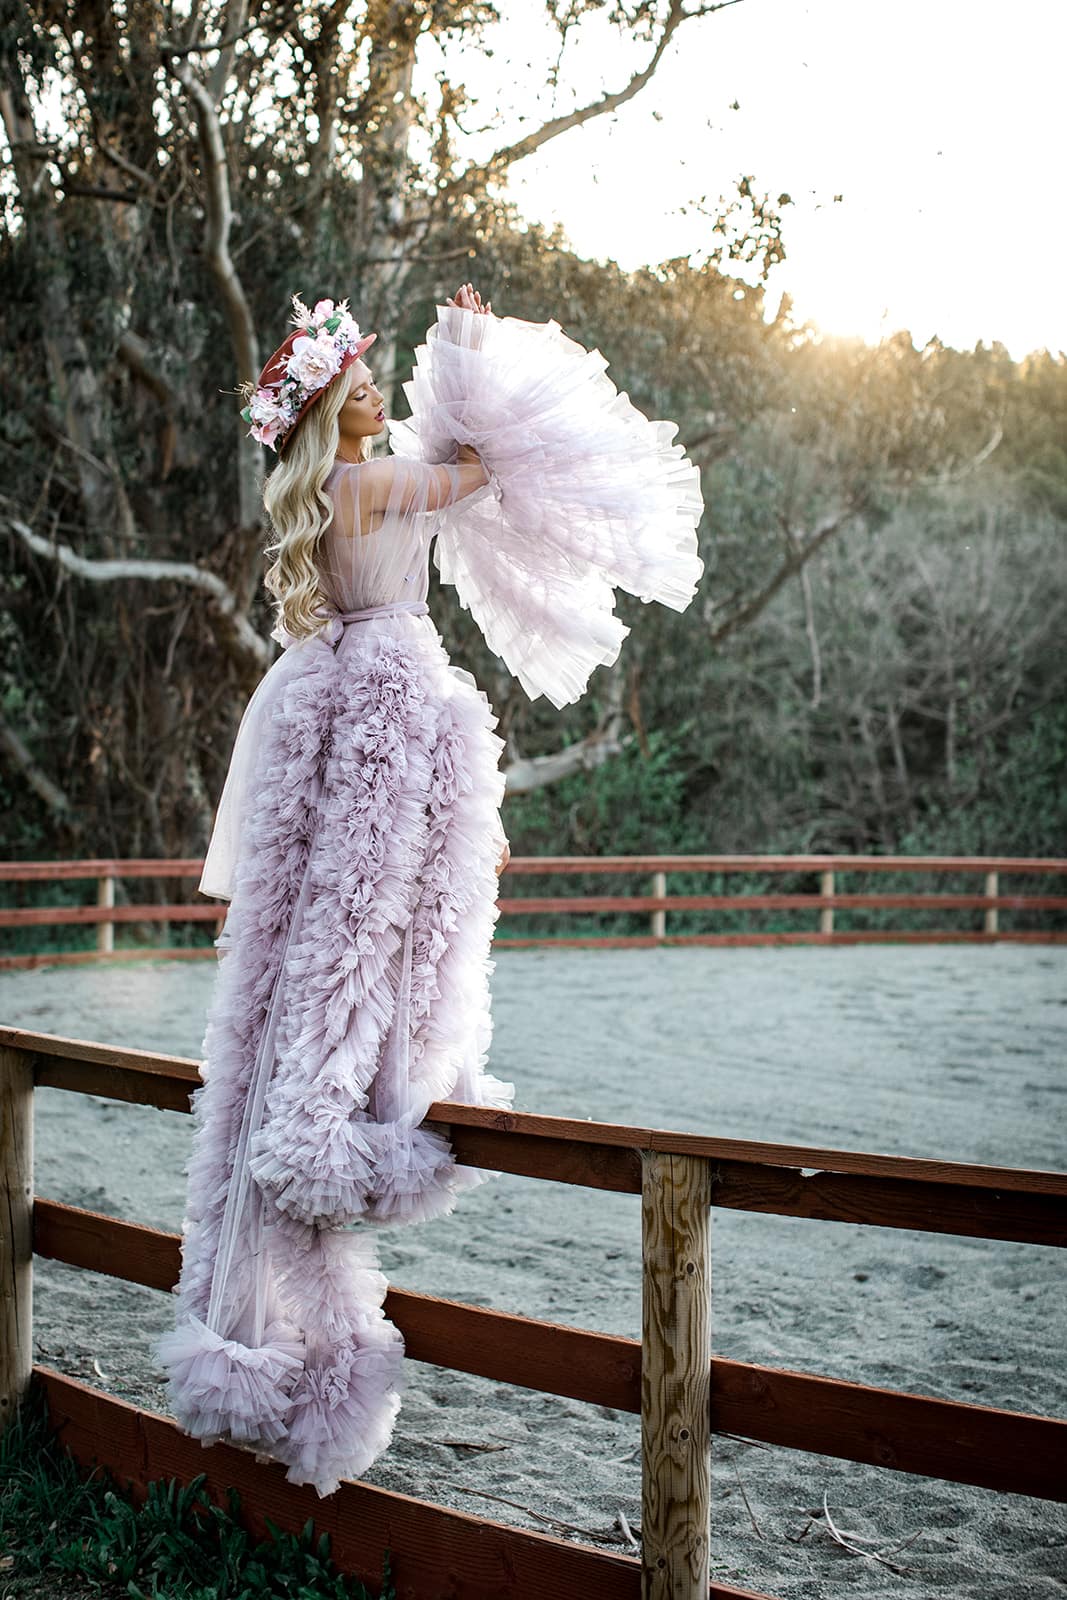 Model stands on fence railing in dramatic purple couture bridal robe